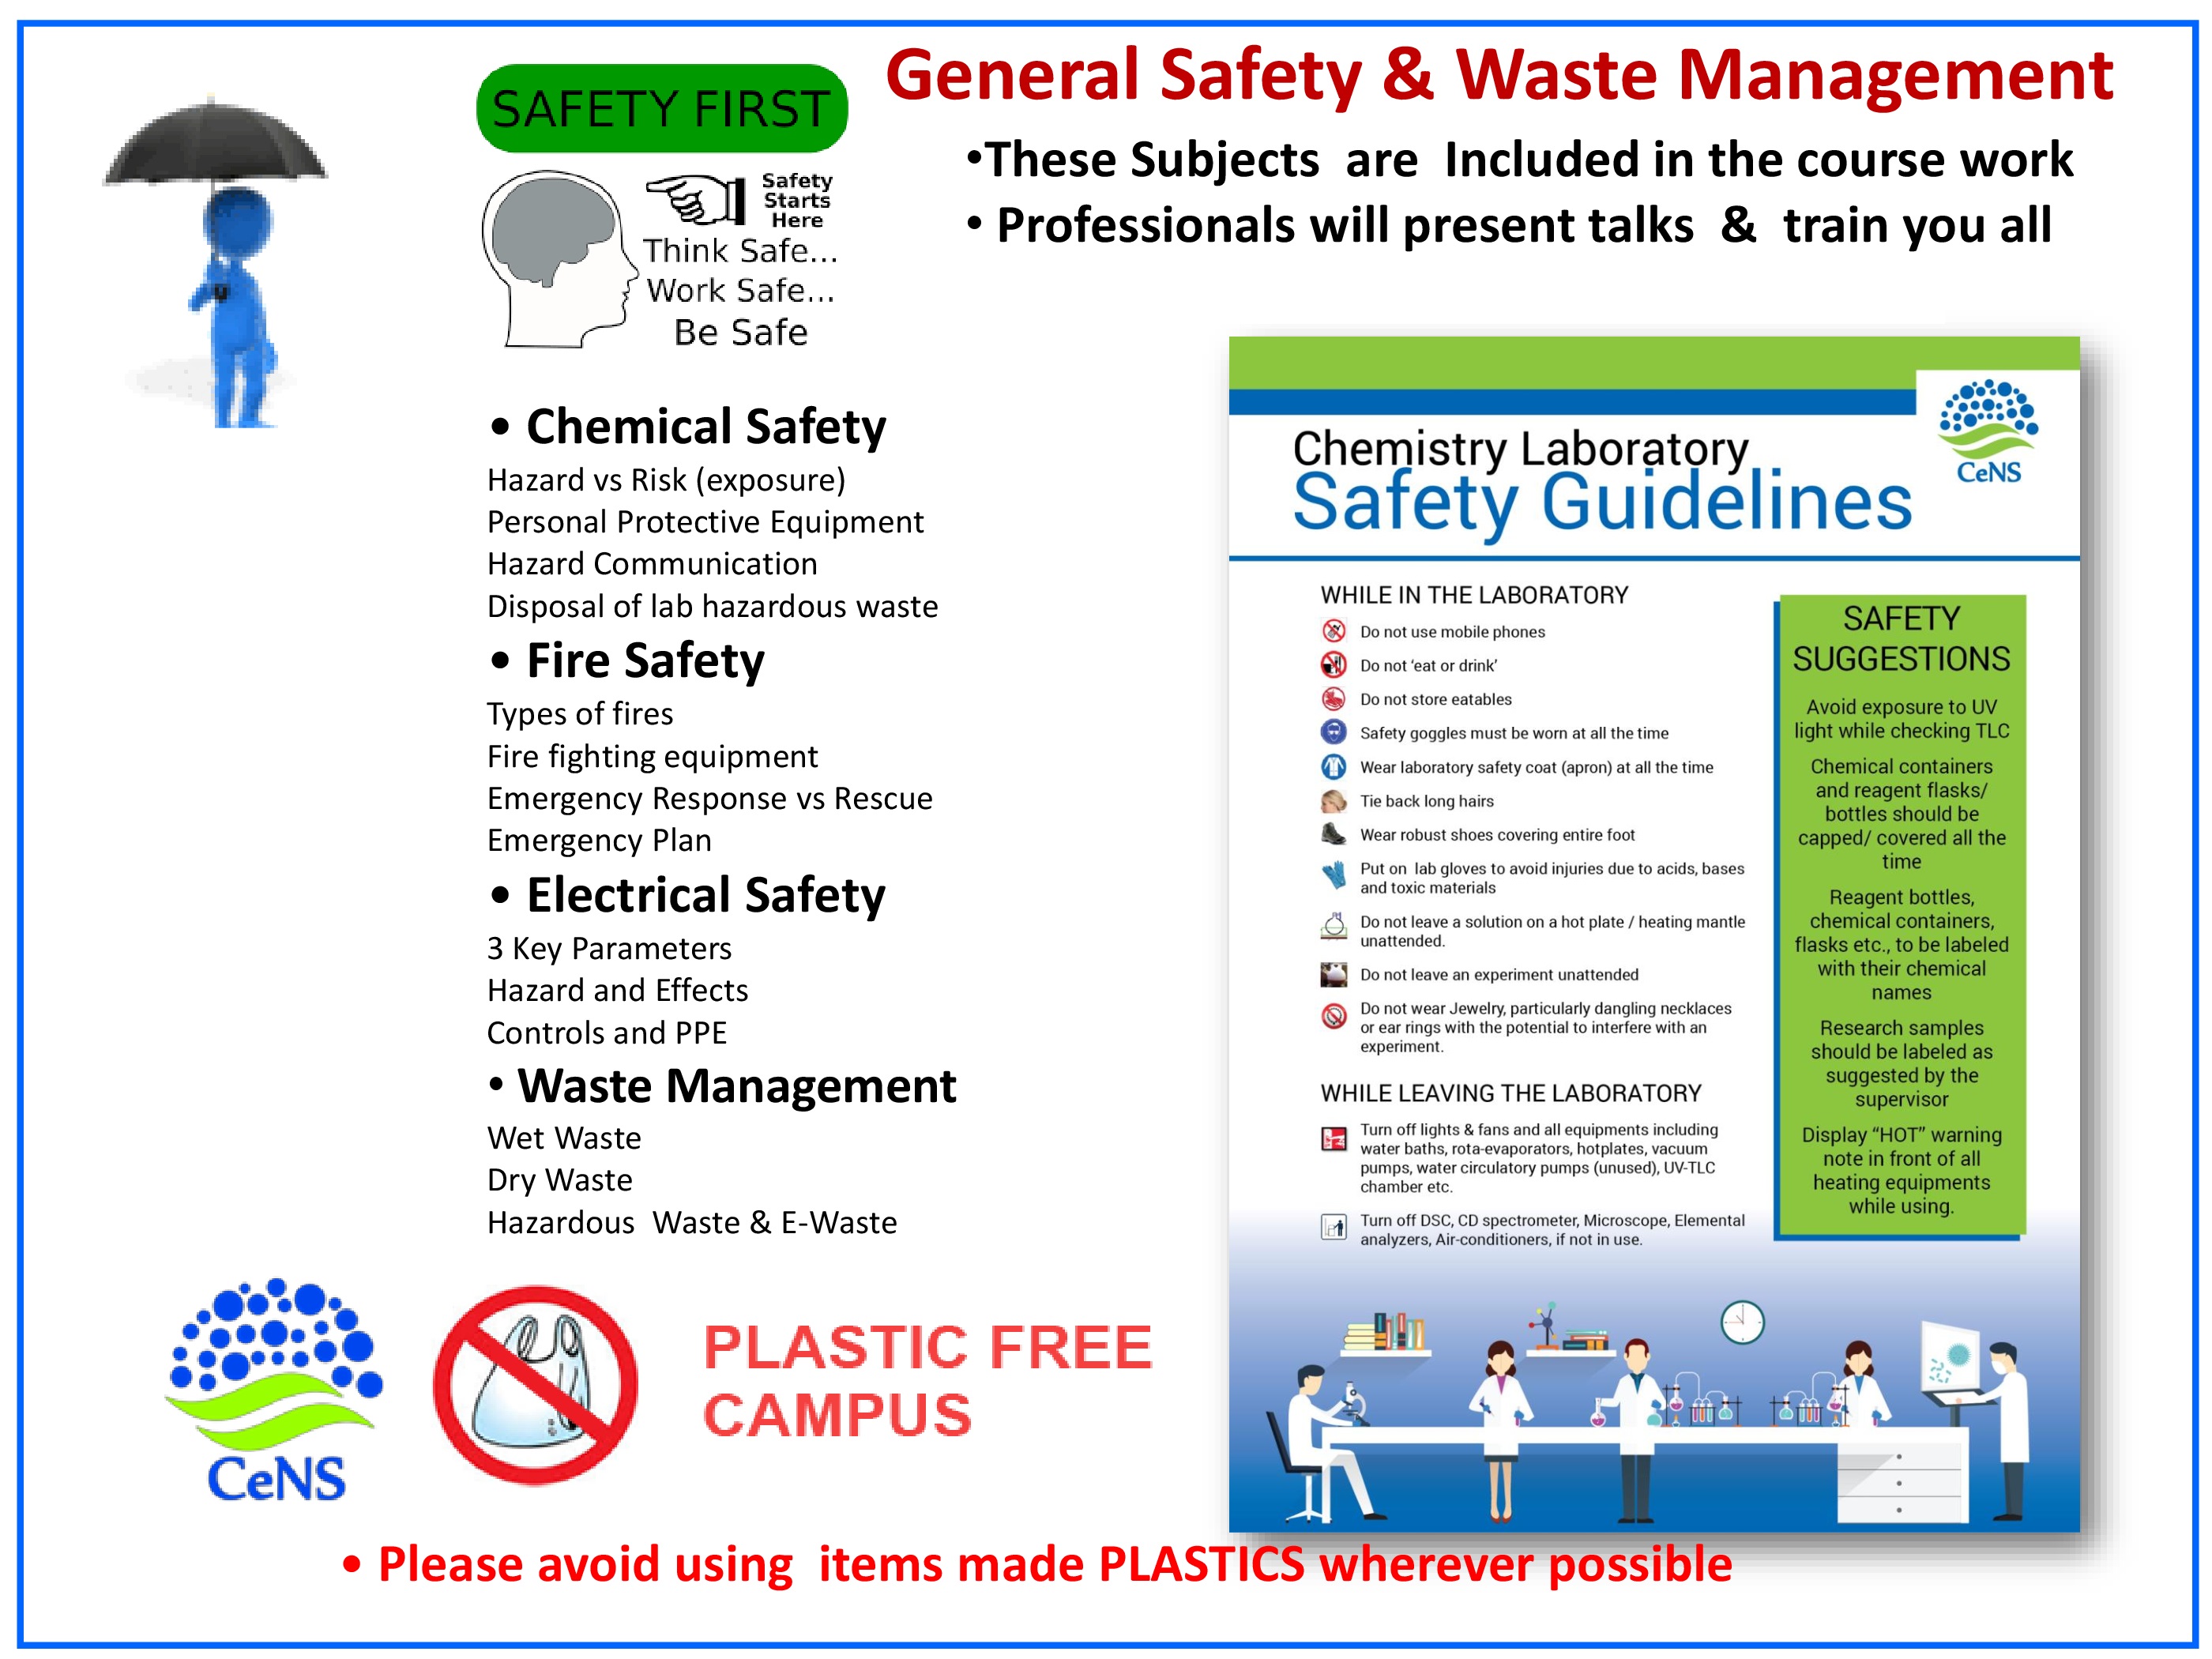 General Safety and Waste Management